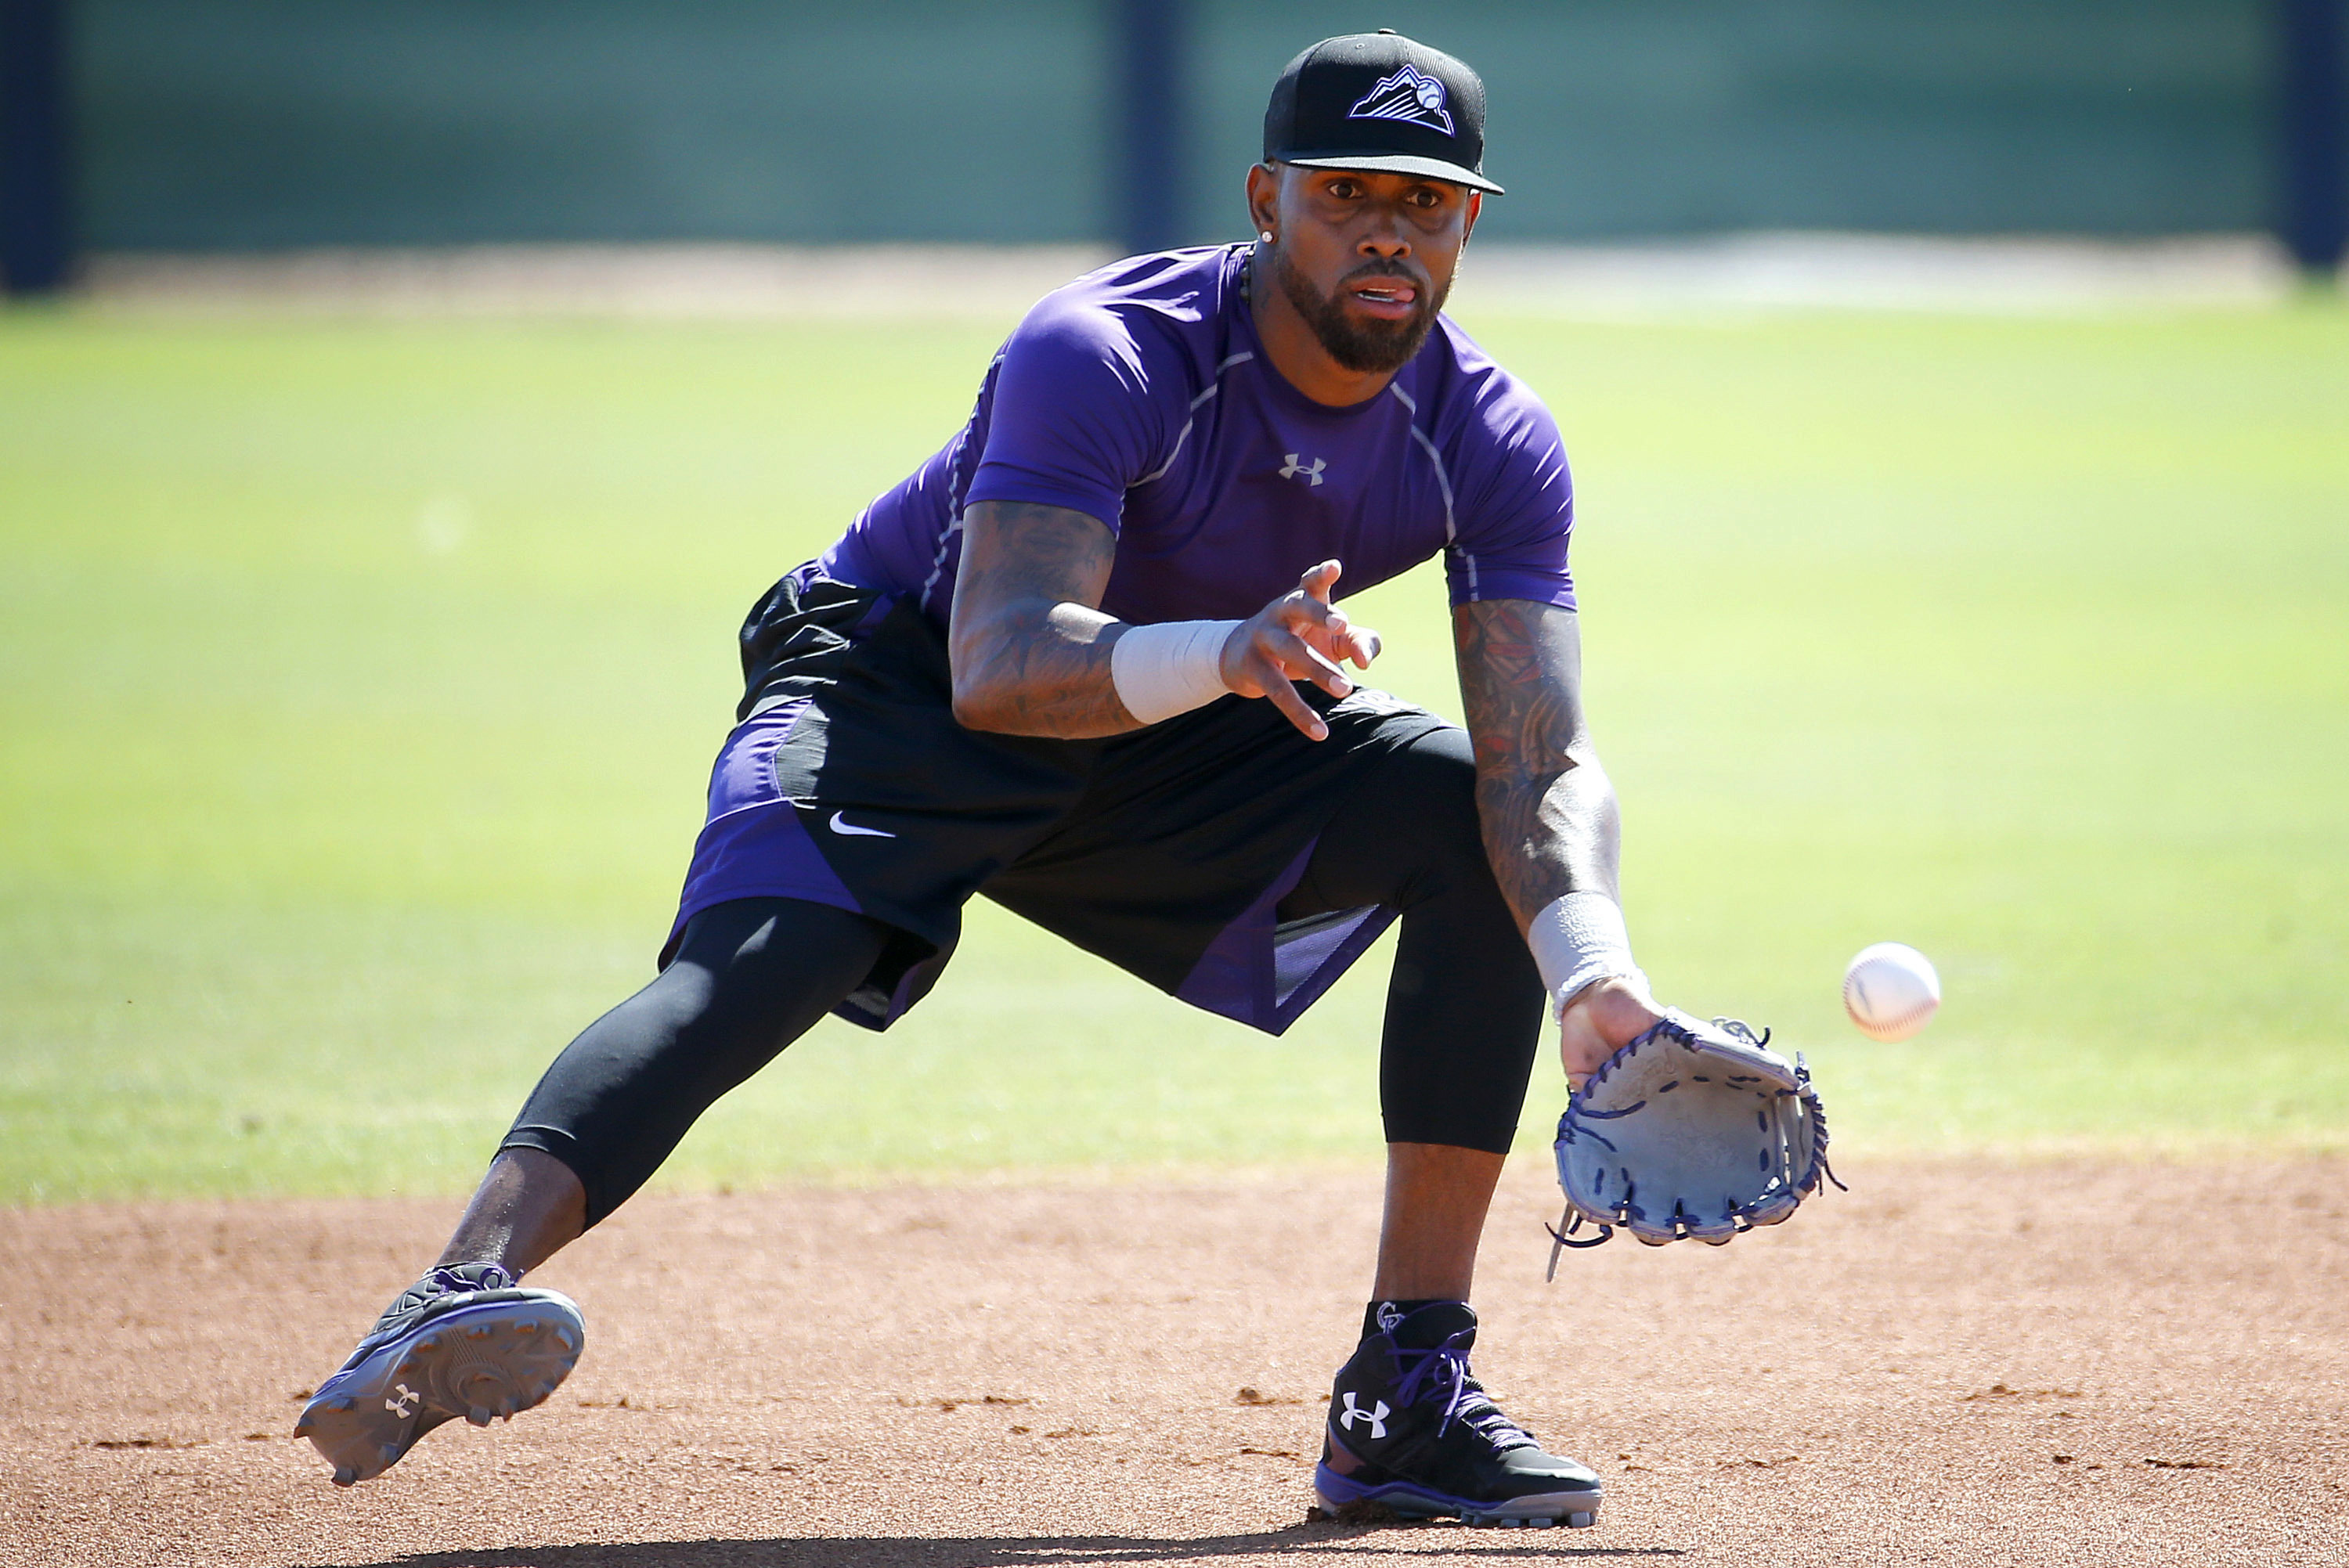 Colorado Rockies on to Trevor Story with Jose Reyes out at